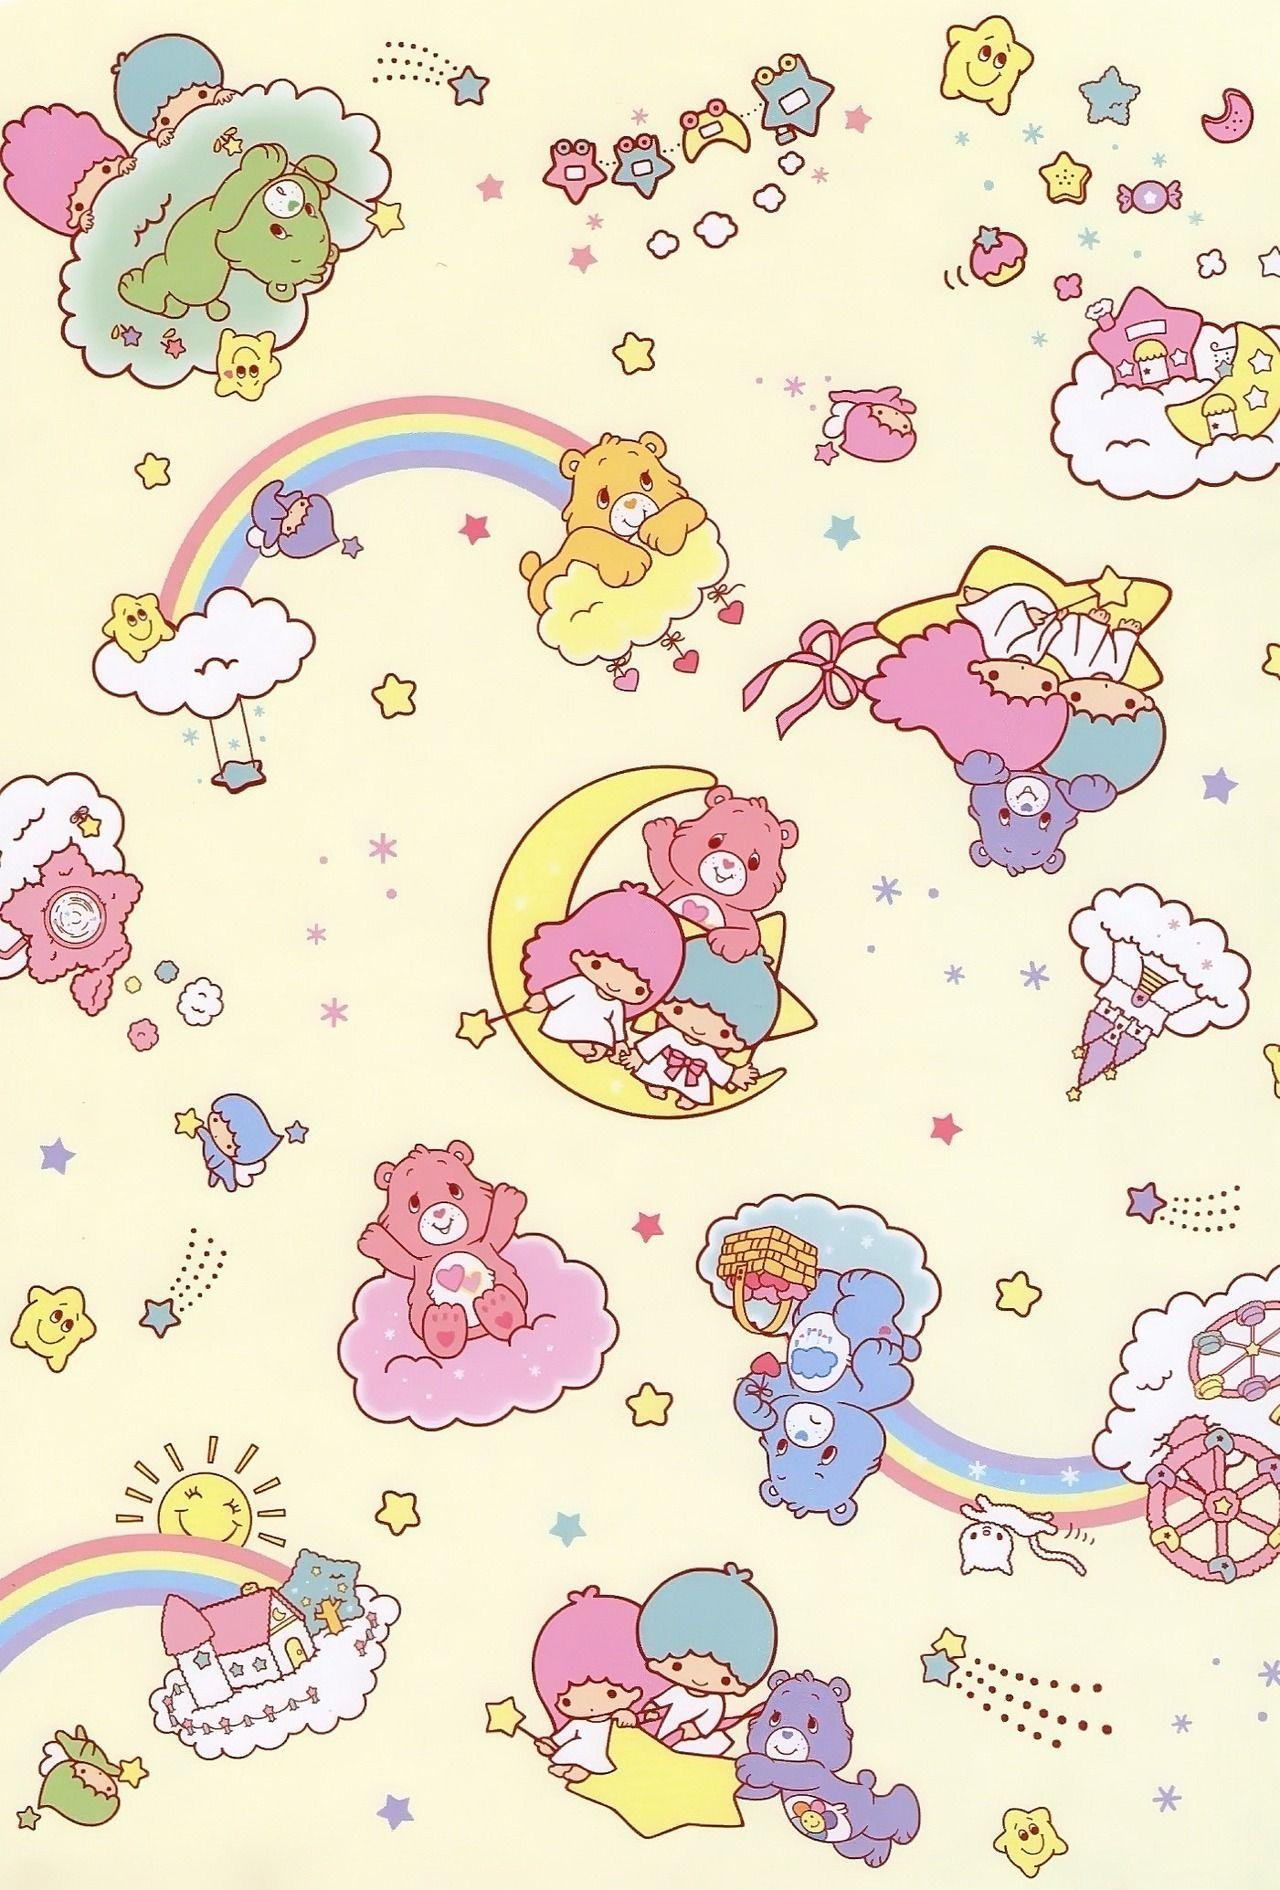 Thank you for this GIANT image! Little Twin Stars & Care Bears